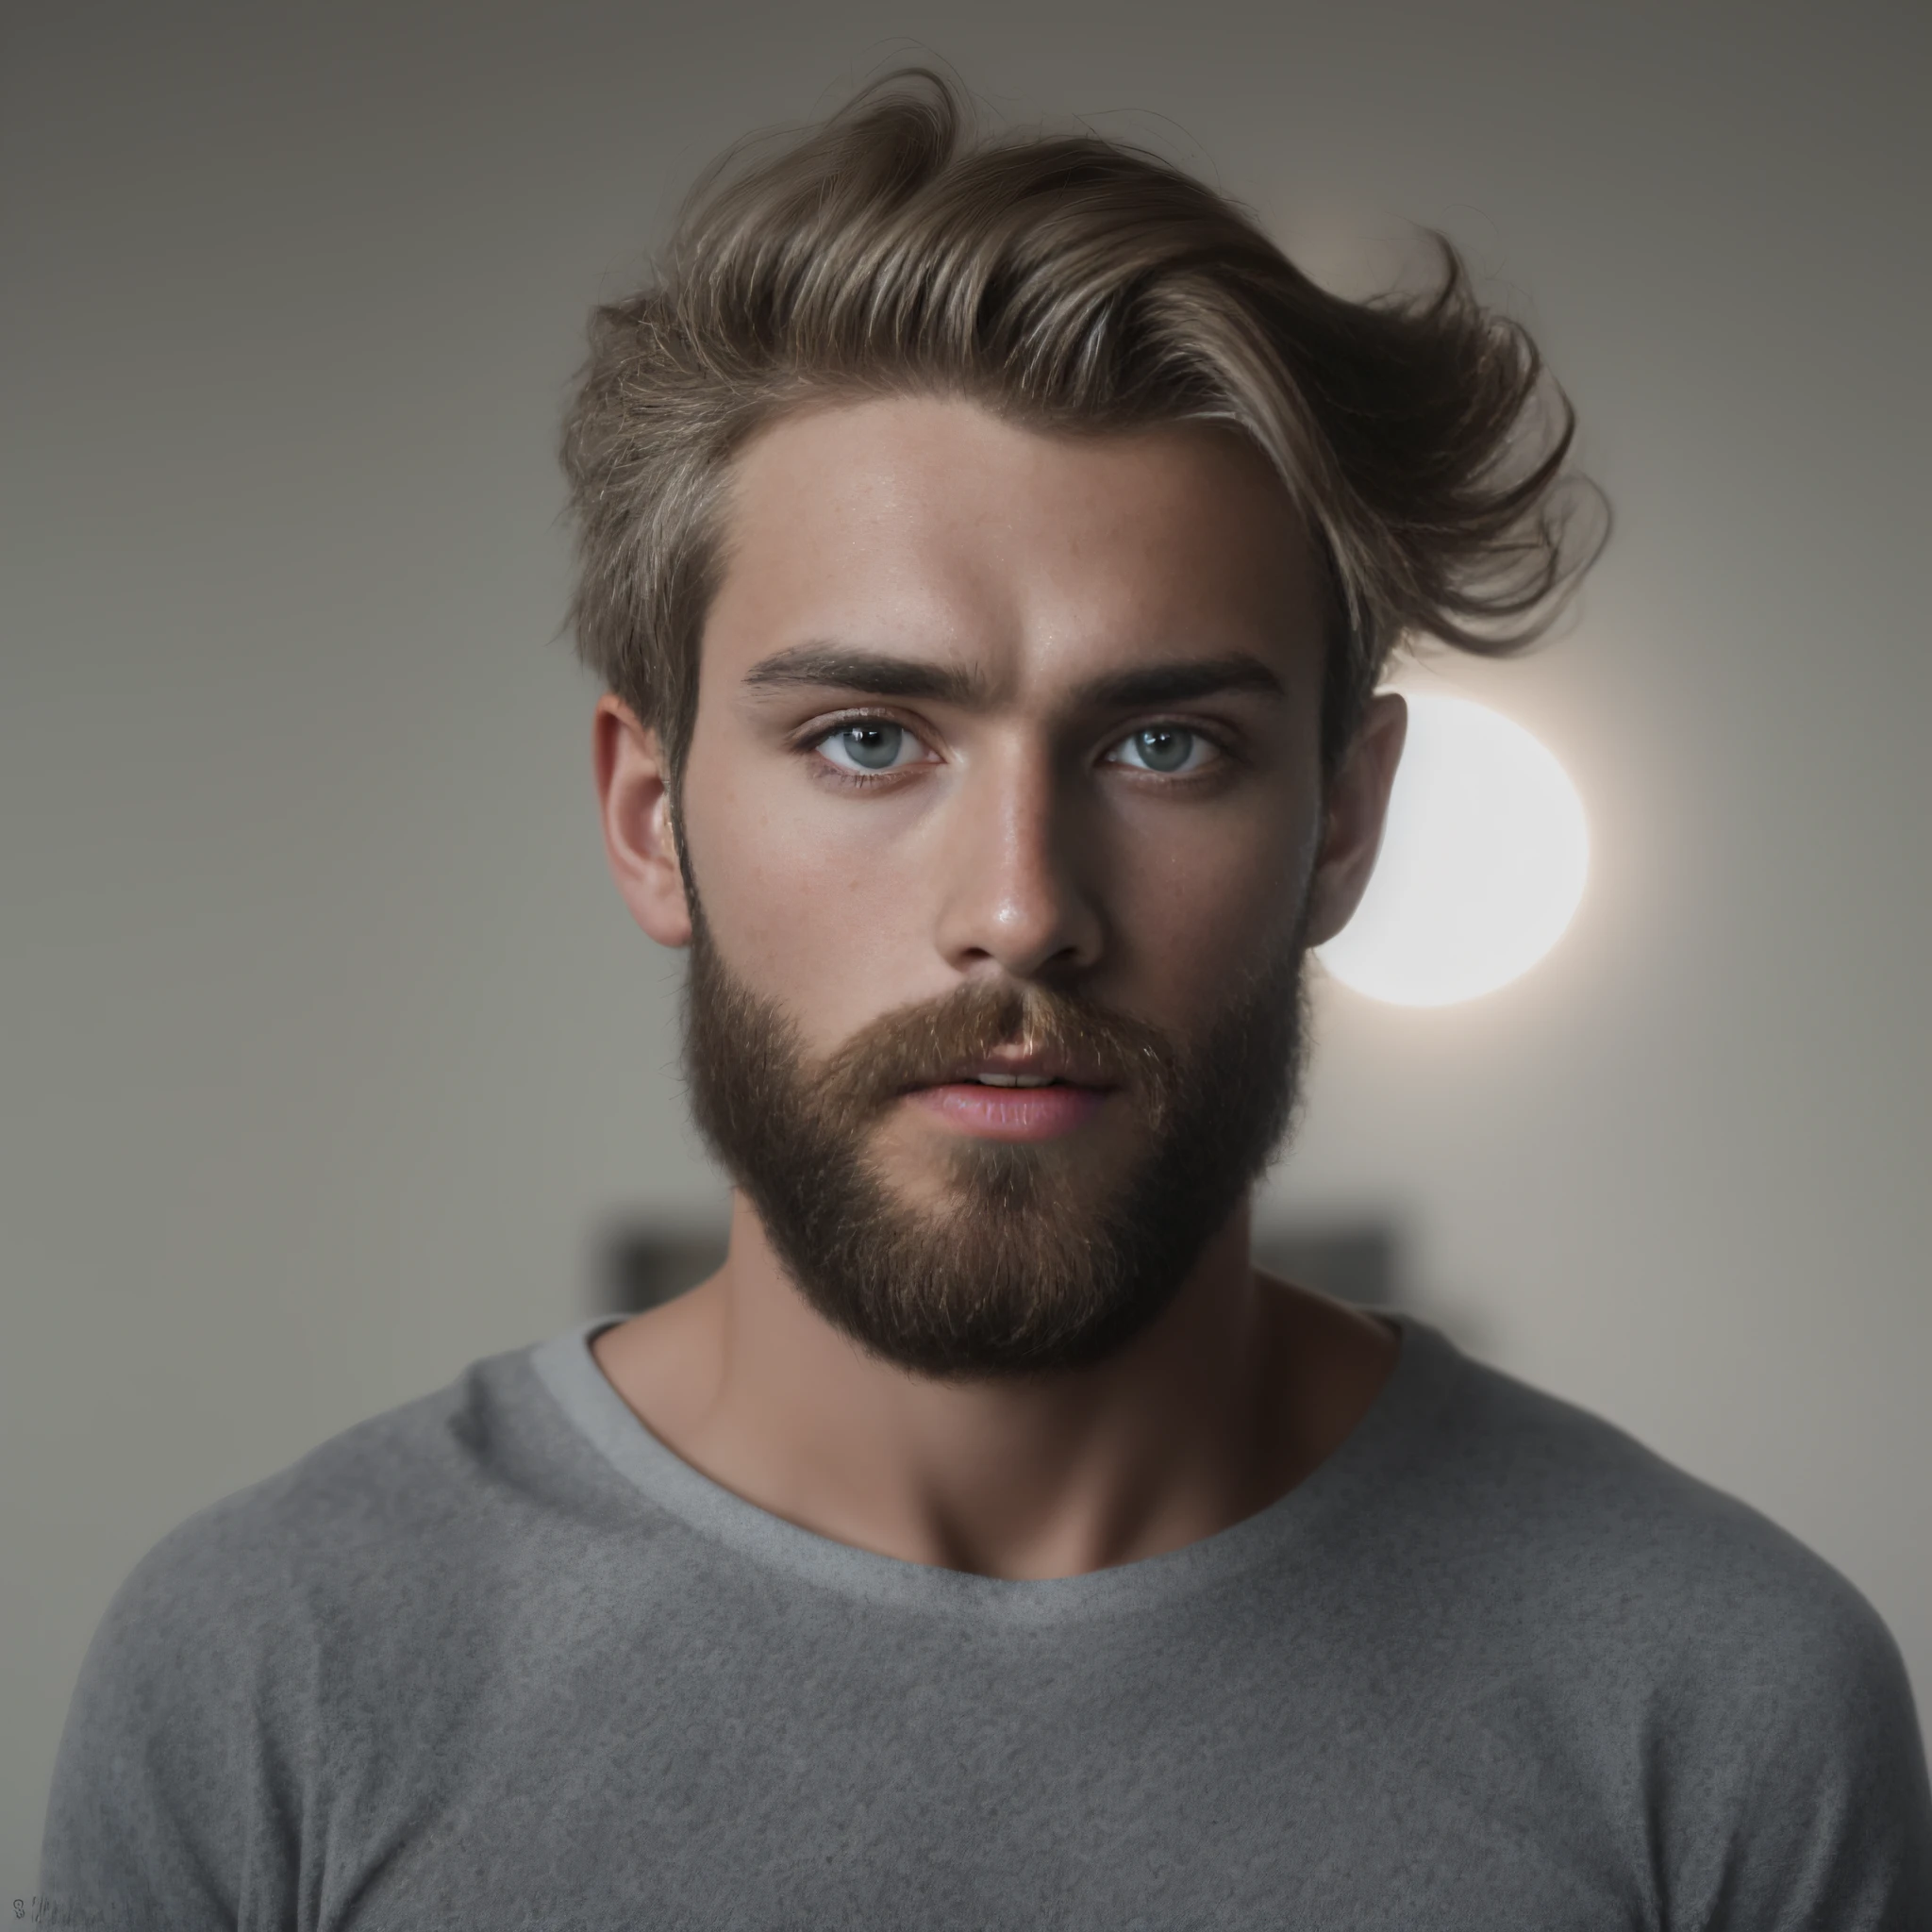 A 23-year-old man from Finland, masculine, bearded, full beard, role model, fully body, Very beauthful, looking-into-camera, detailled image, uhd, 8K, well-lit, grain of film, perfect  lighting